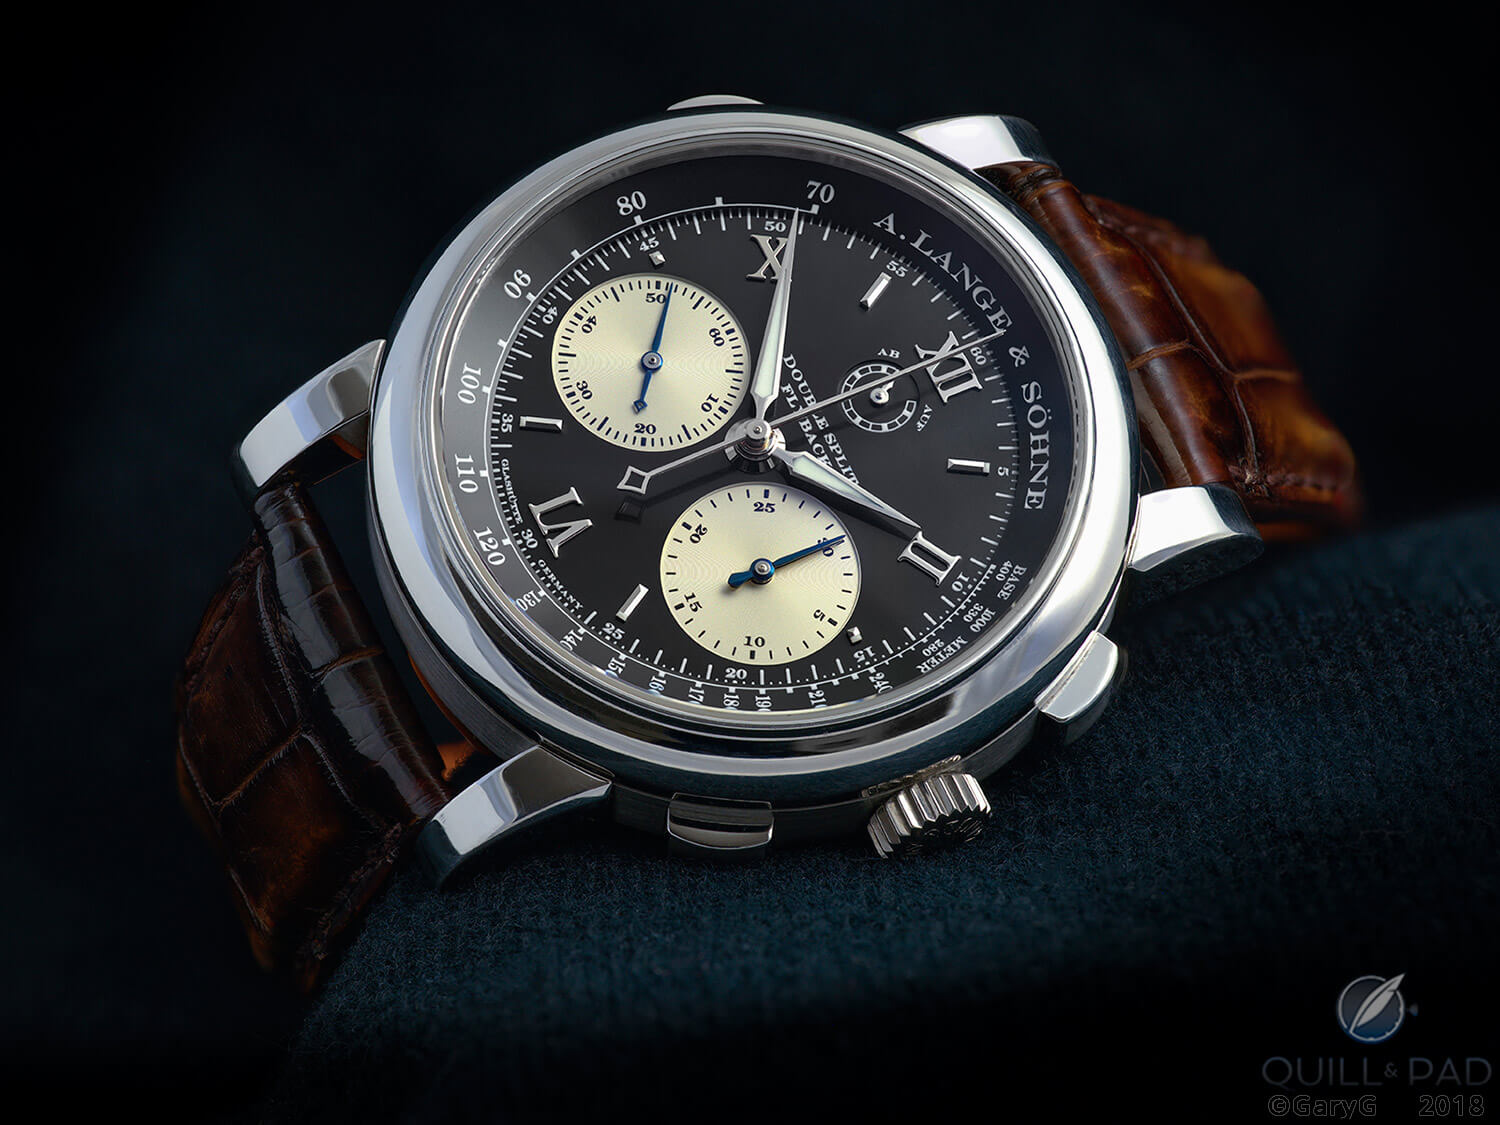 Love at first shot: A. Lange & Söhne Double Split captured with the Hasselblad X1D